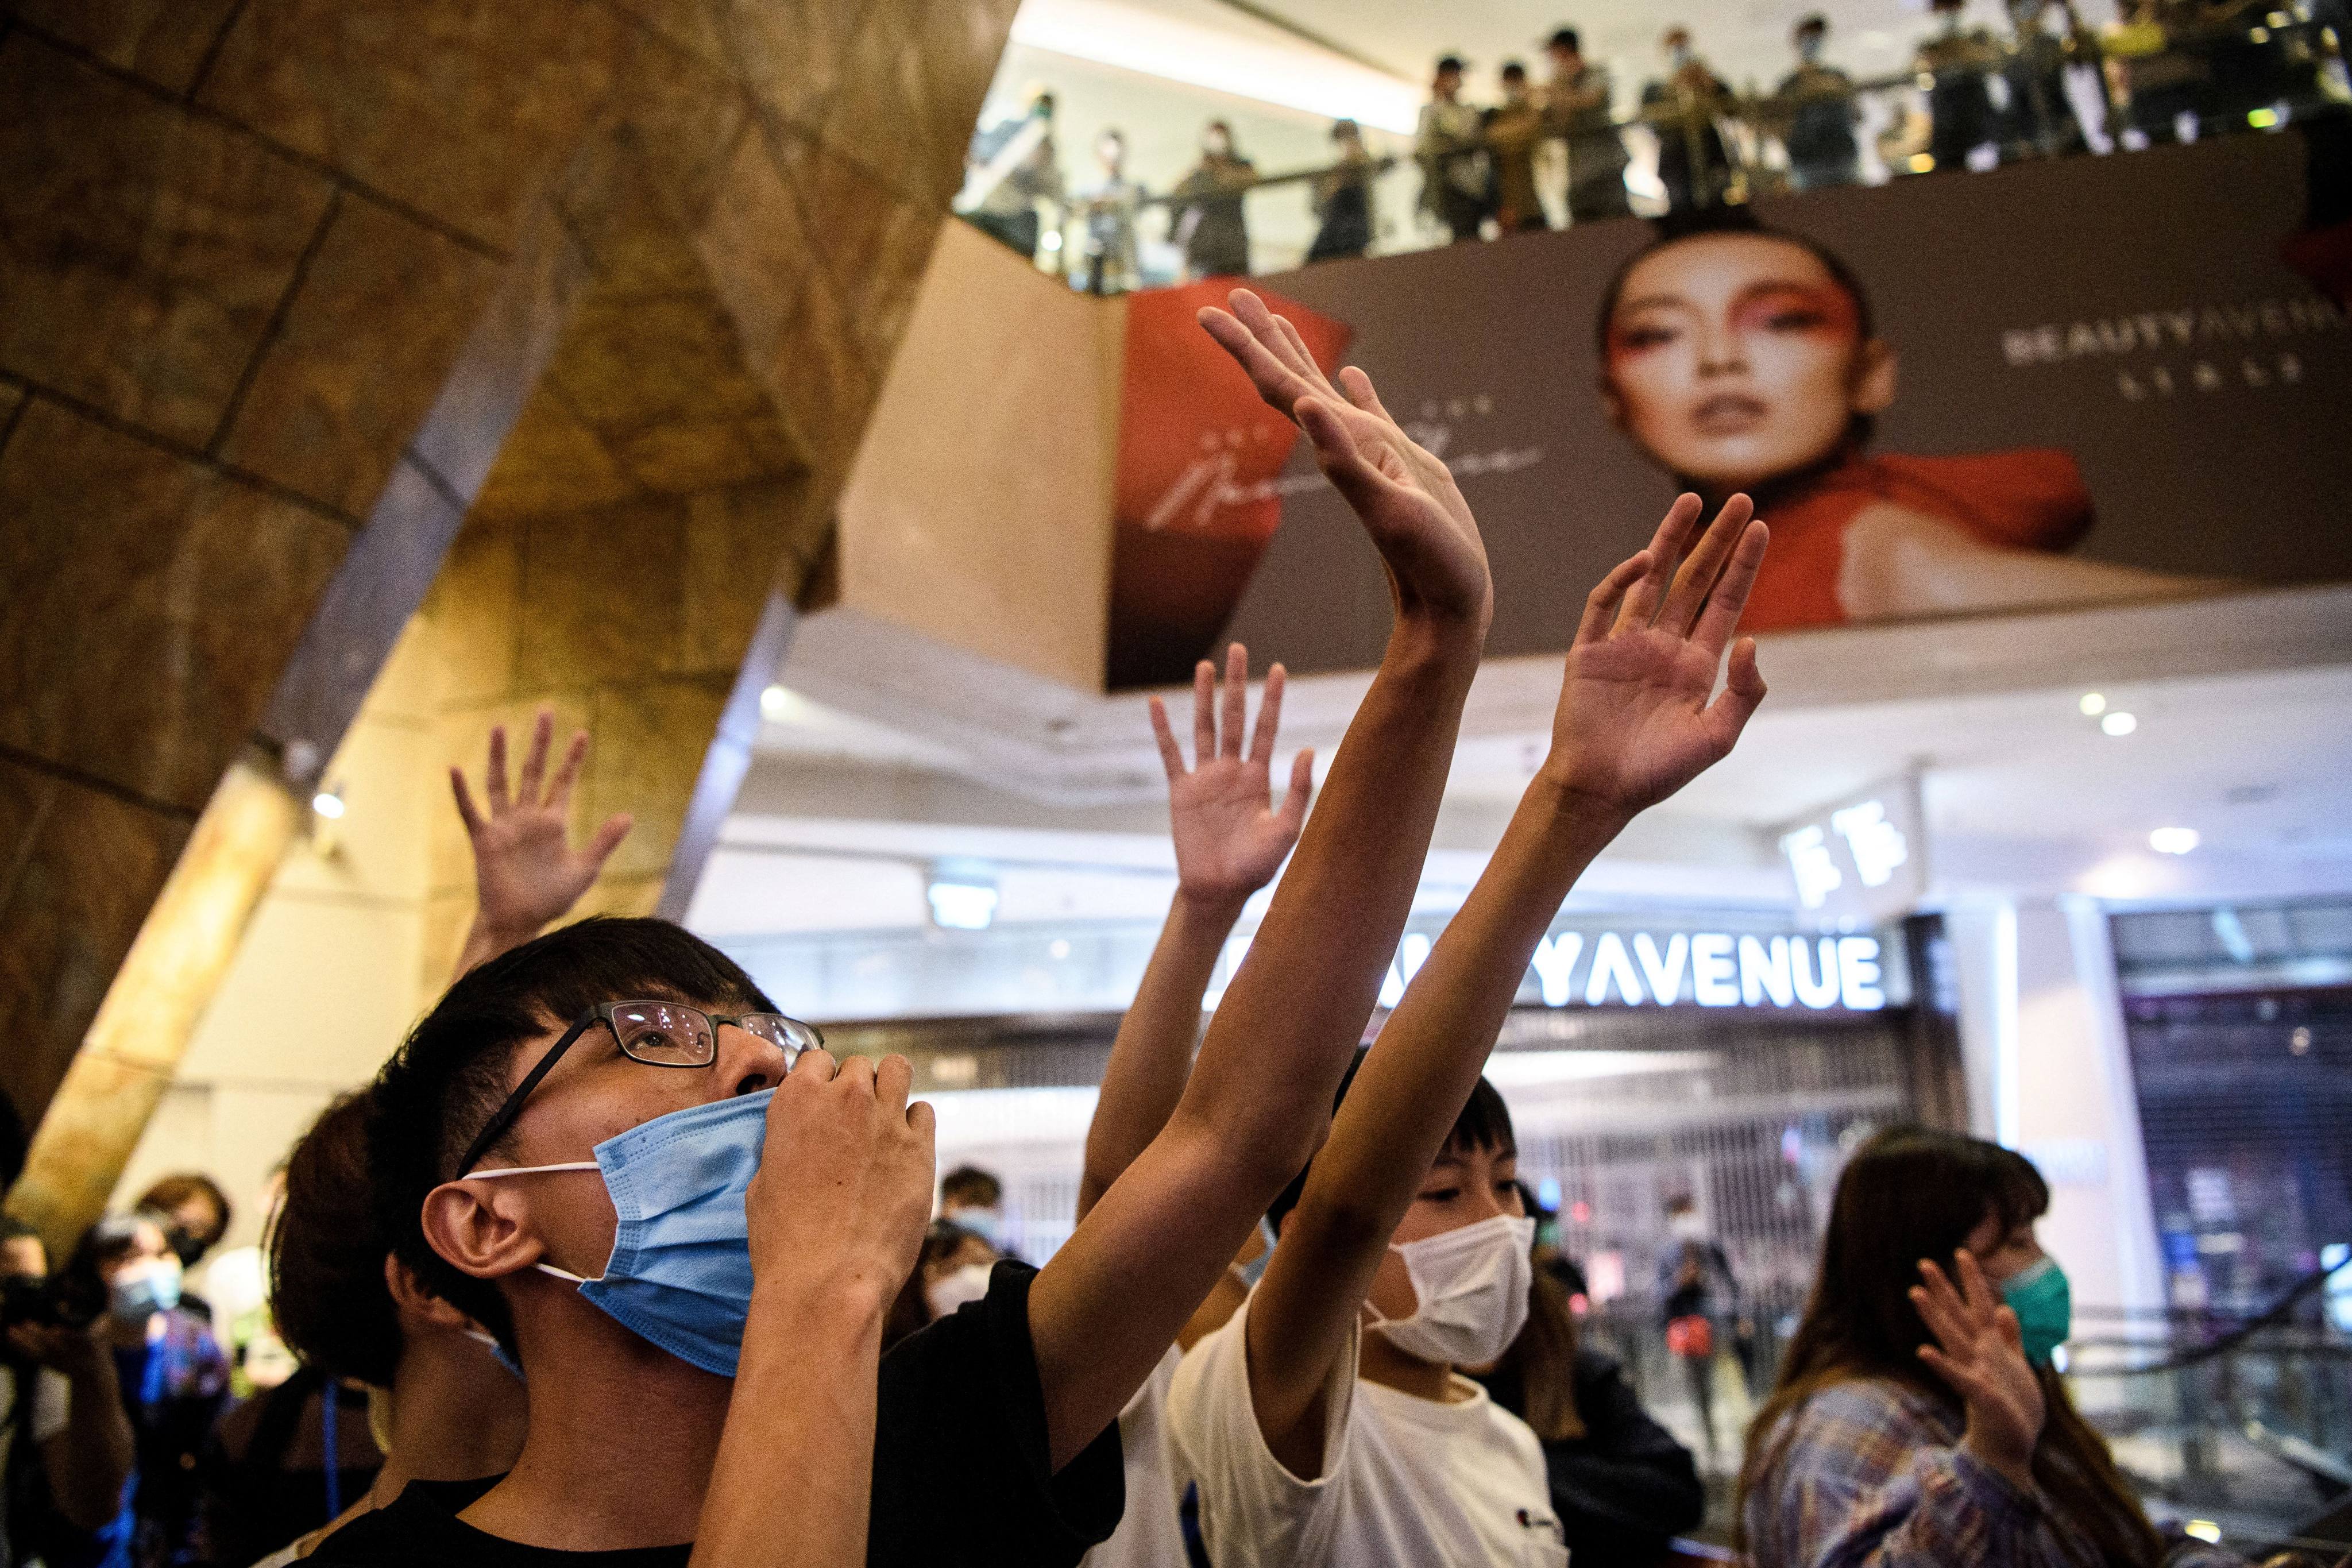 Protesters gather to sing “Glory to Hong Kong” at a shopping mall during the 2019 anti-government demonstrations. Photo: AFP